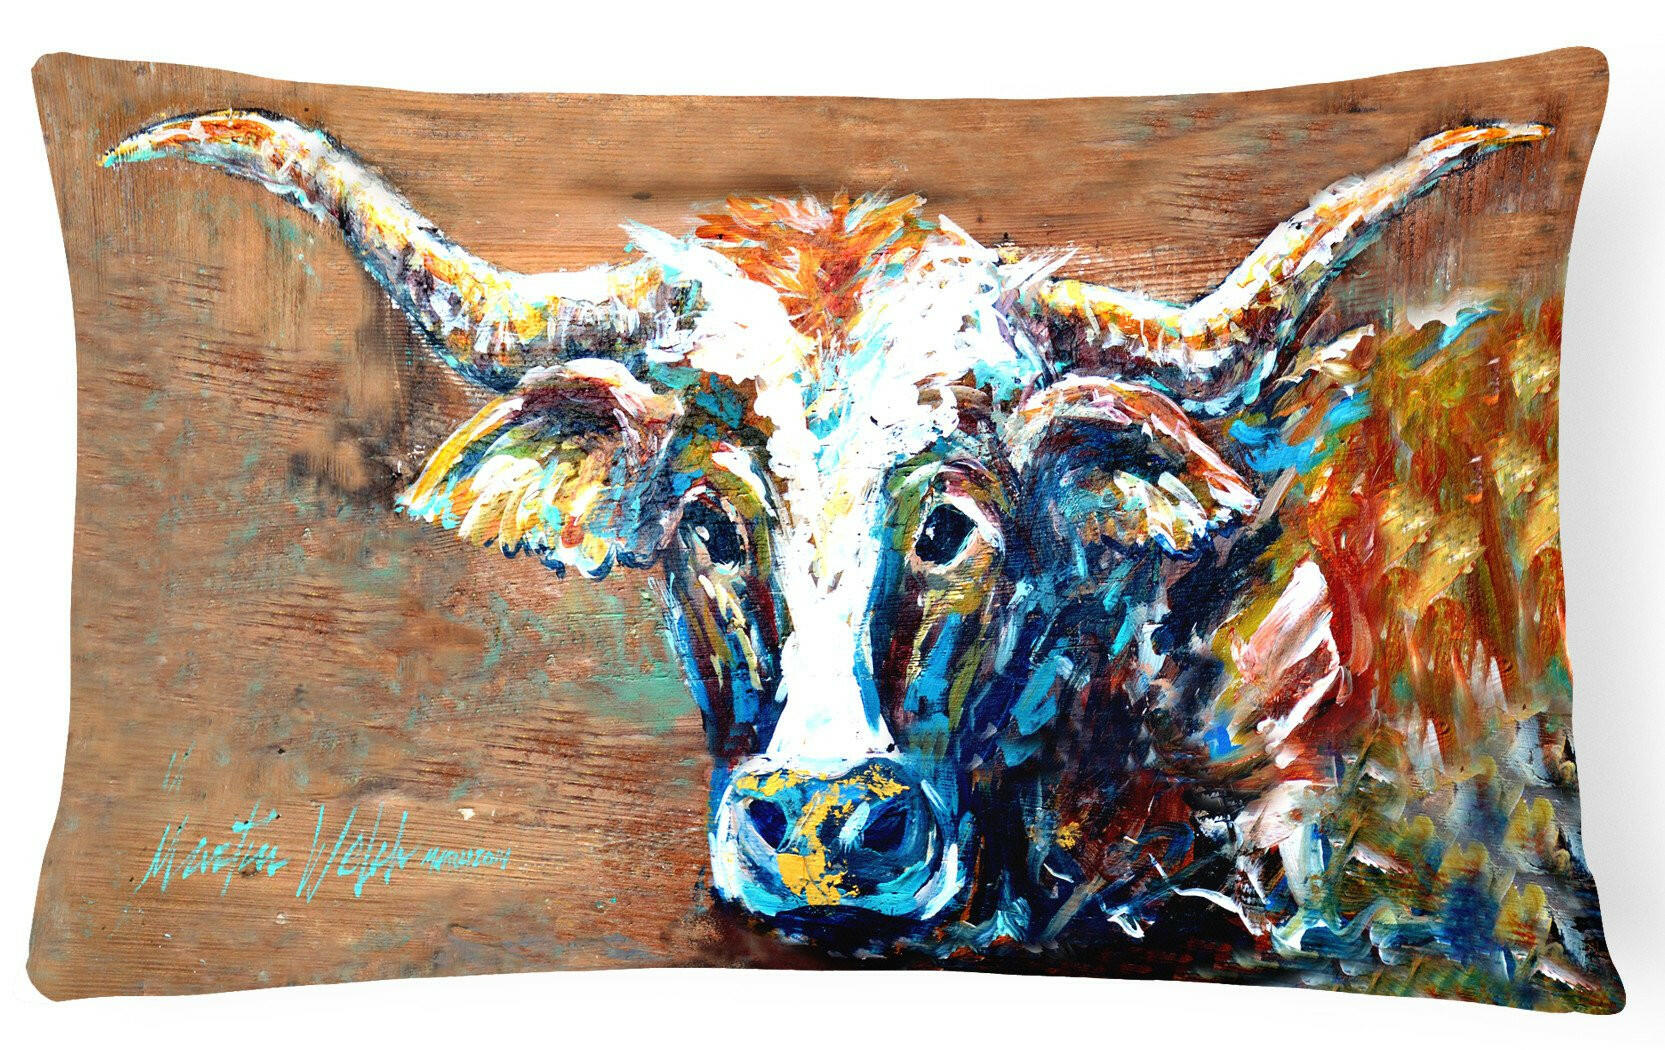 On the Loose Brown Cow   Canvas Fabric Decorative Pillow MW1165PW1216 by Caroline's Treasures